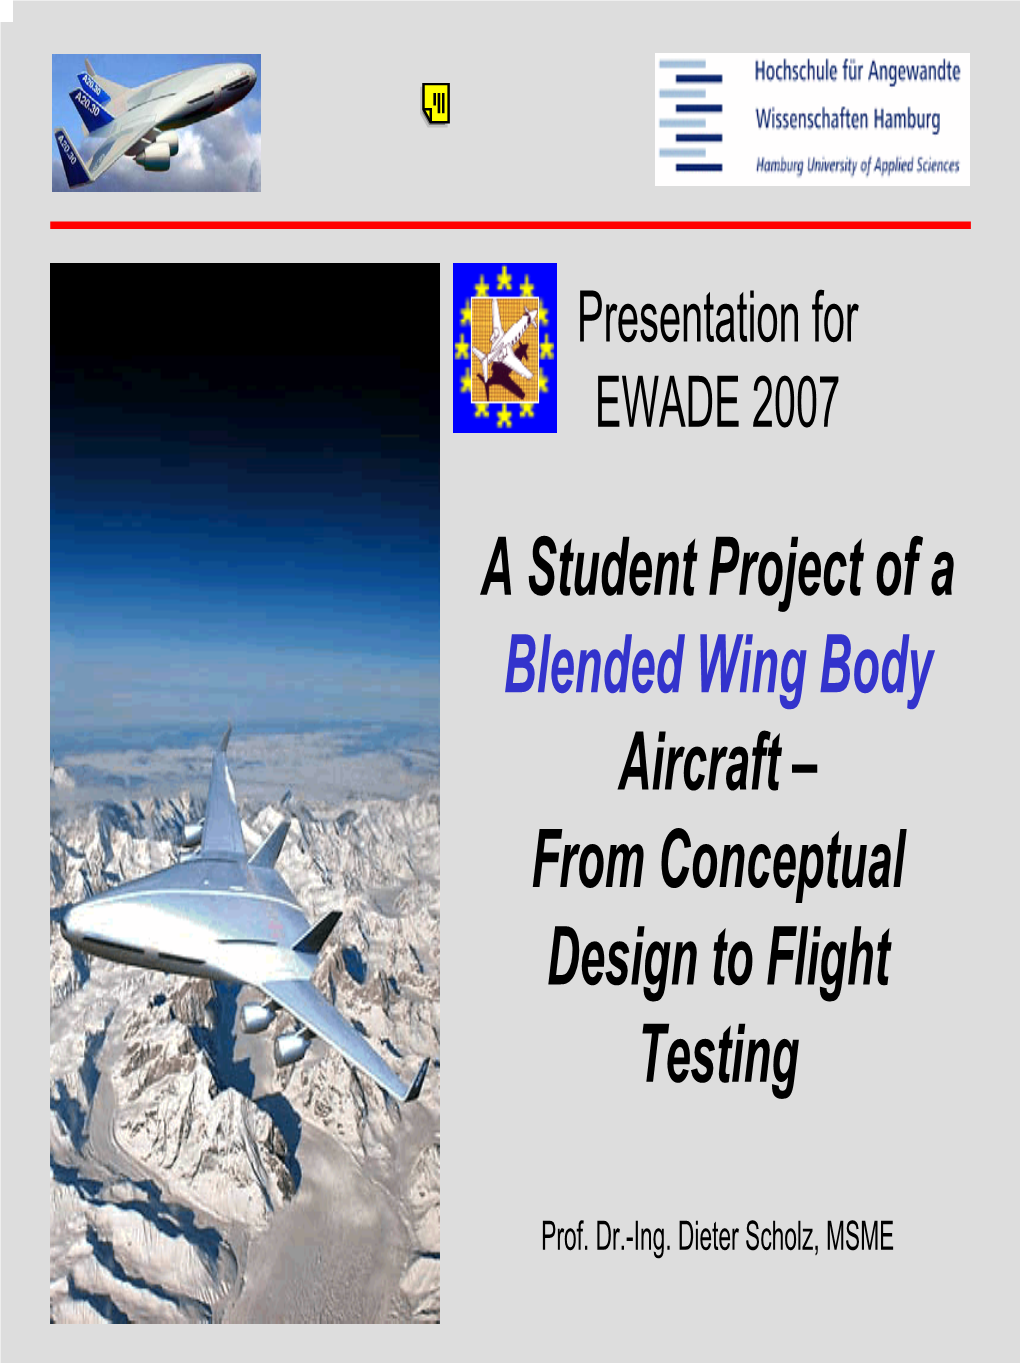 A Student Project of a Blended Wing Body Aircraft – from Conceptual Design to Flight Testing